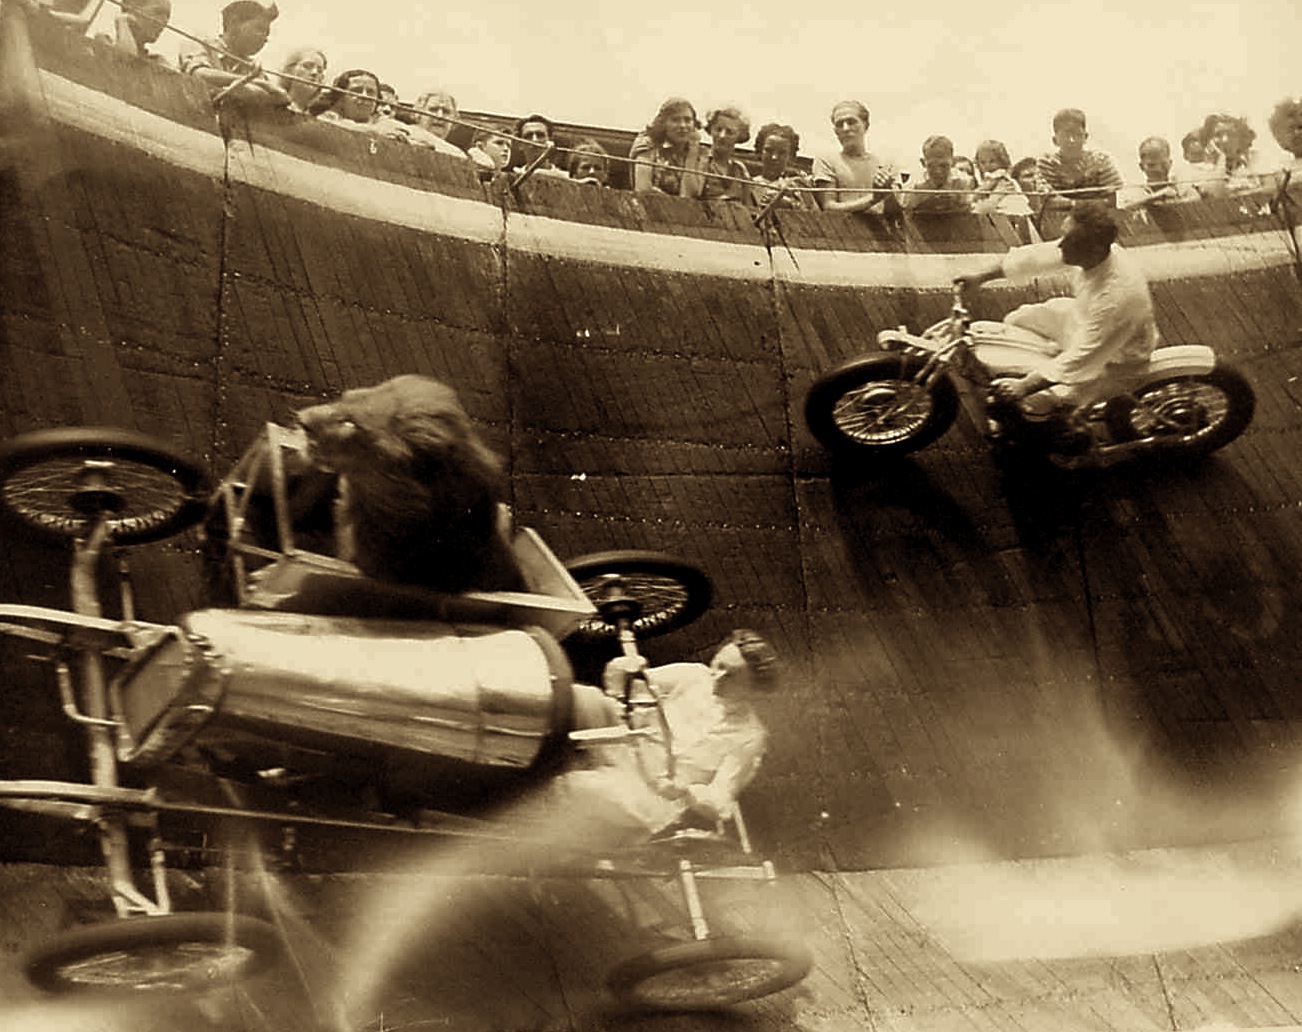 Ethel Purtle and her husband Earl drive on the Wall of Death with their pet lion in 1933. Yes, that is a full grown male lion they had tamed and would use in shows similar to circus acts.